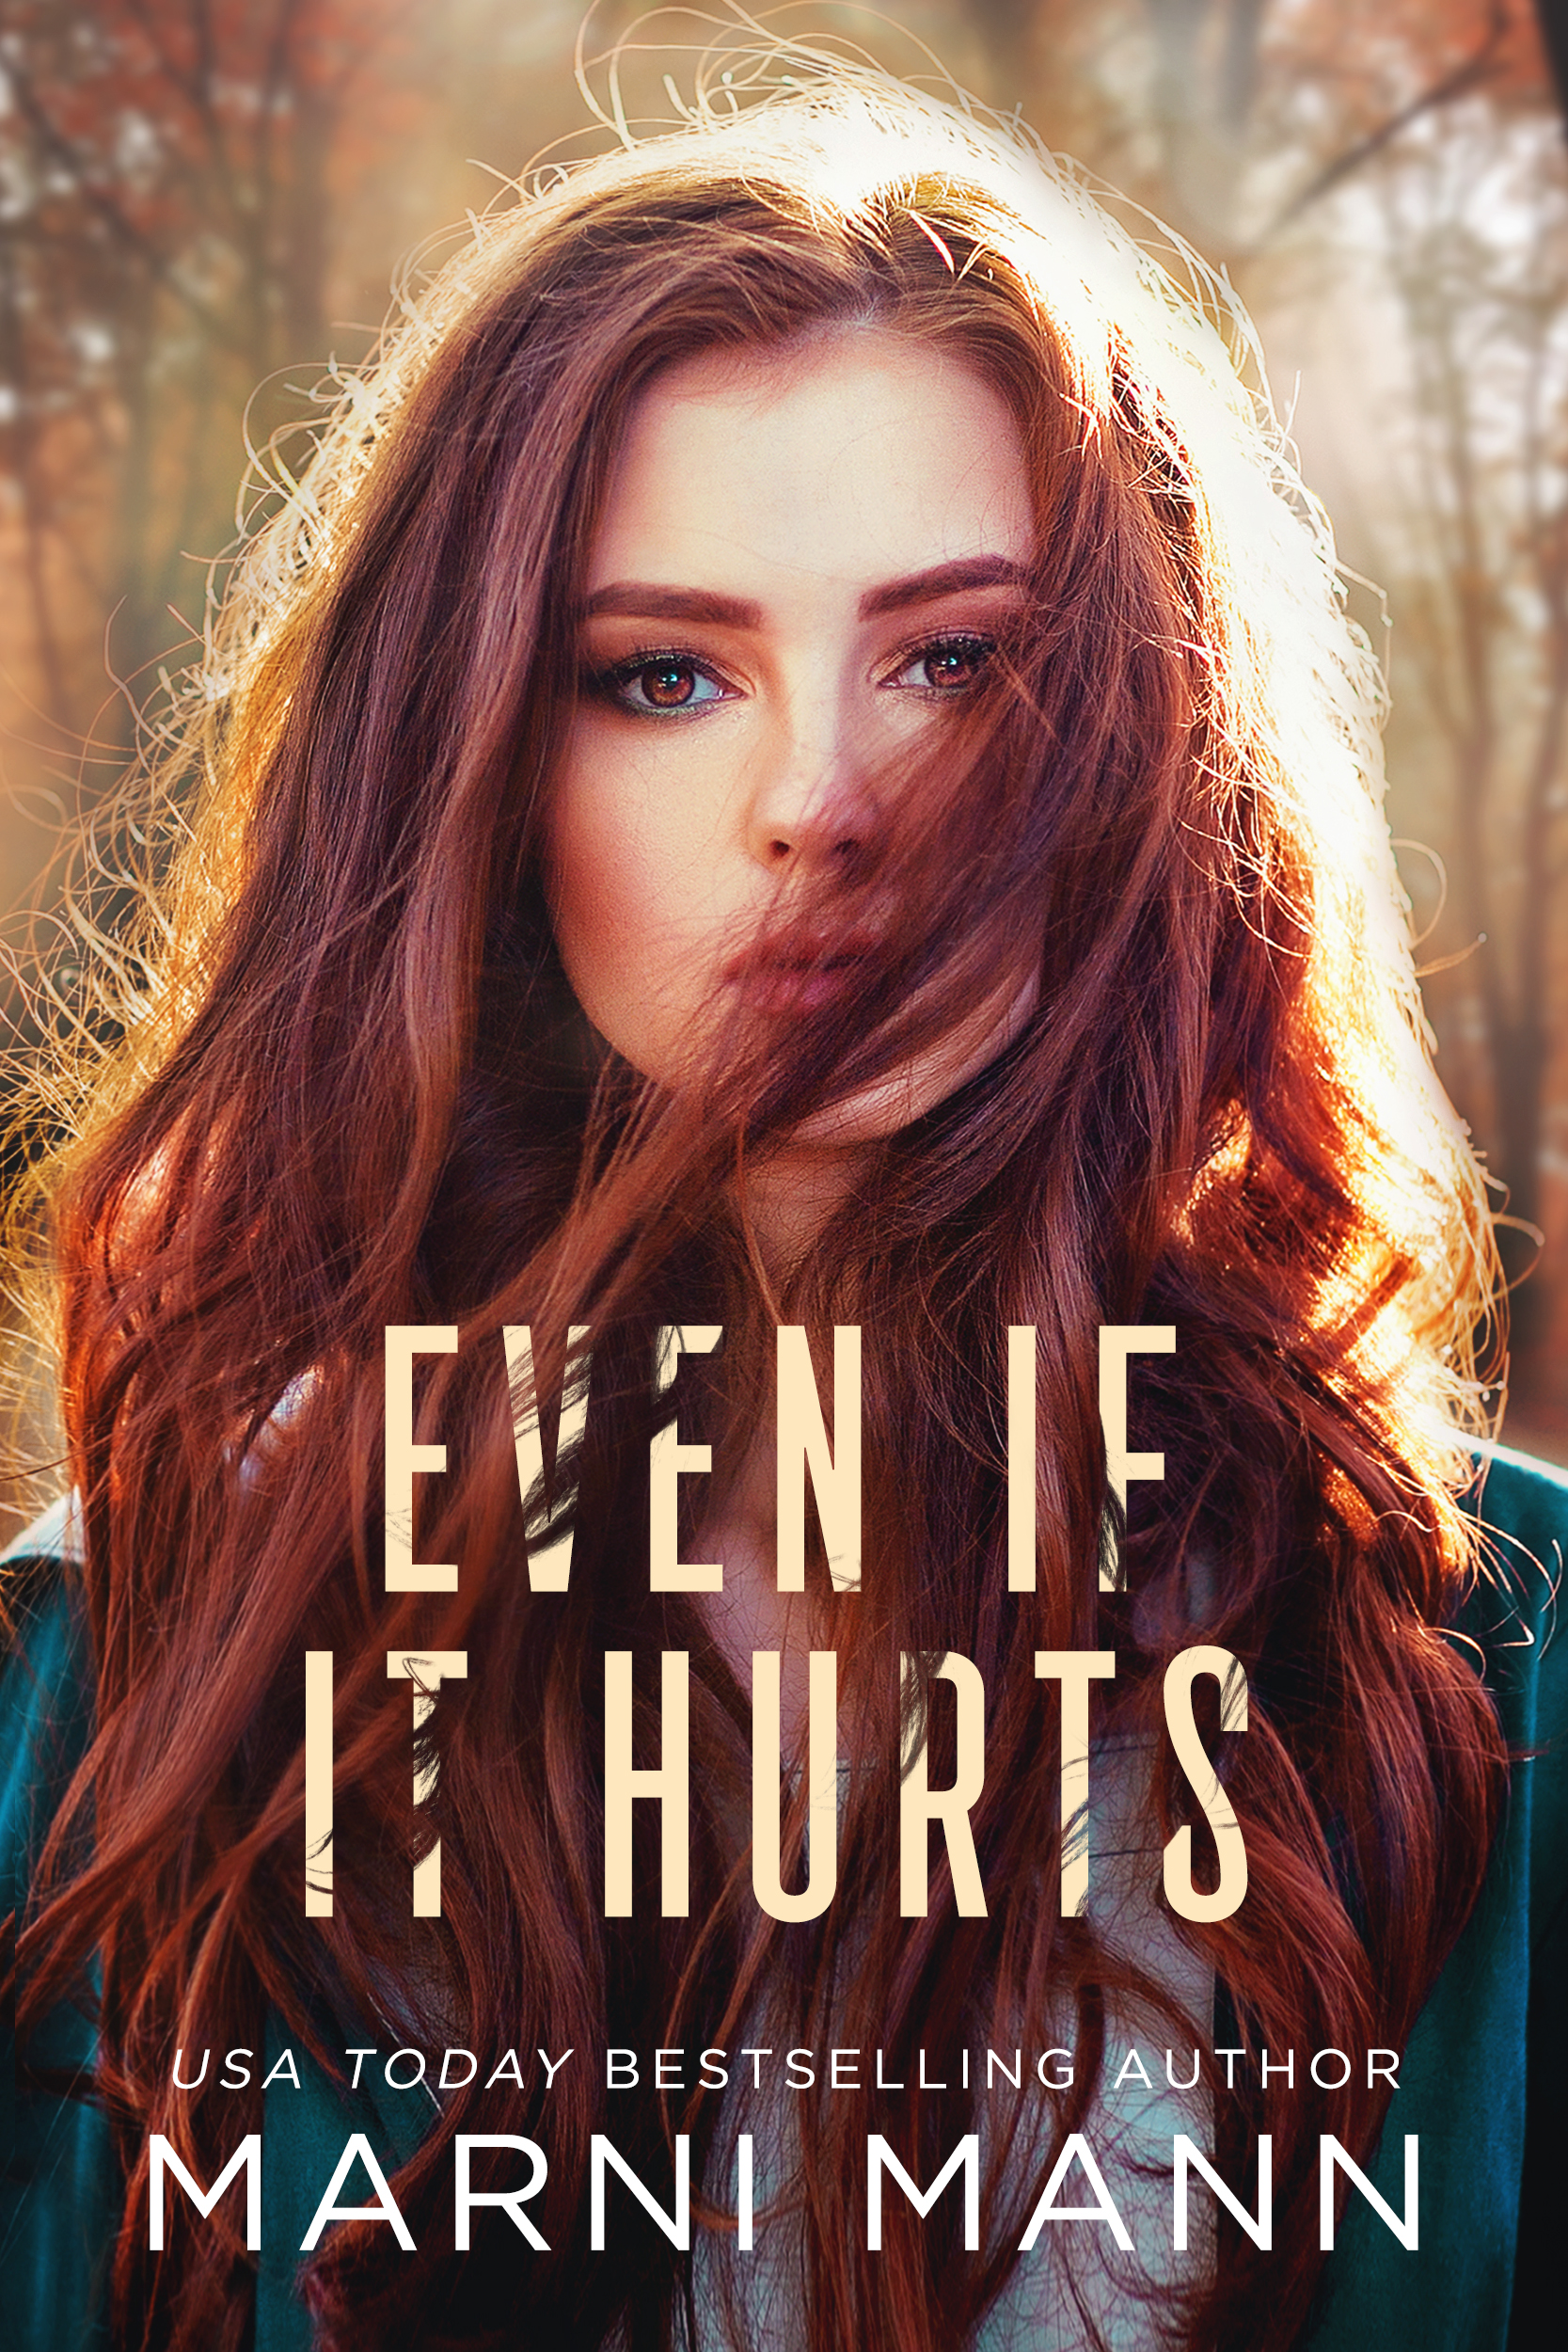 Even If It Hurts by #MarniMann [Release Blitz/Blog Tour]